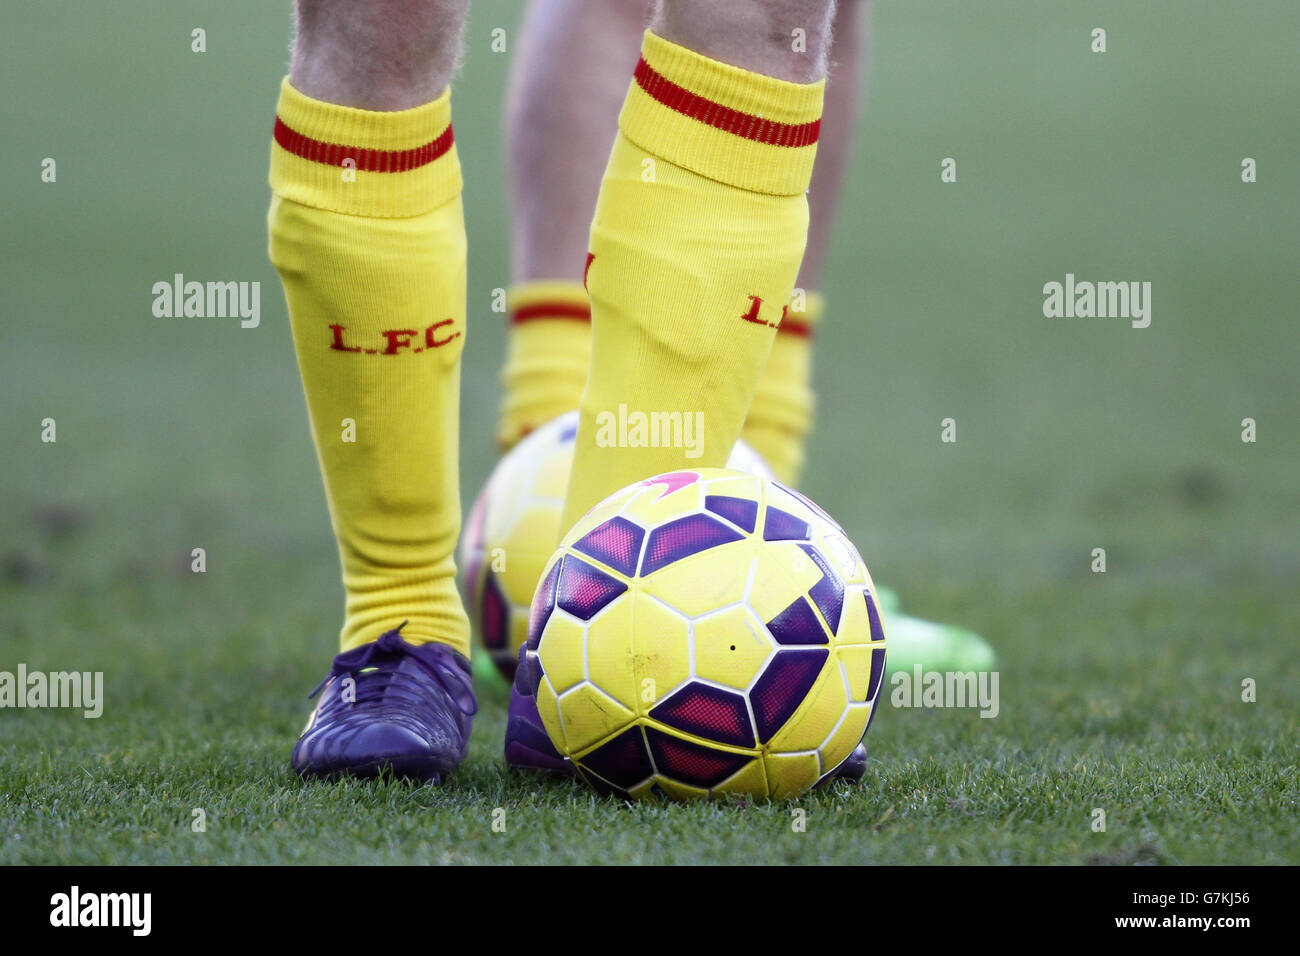 Soccer - Barclays Premier League - Sunderland v Liverpool - Stadium of Light. A shot of a Liverpool players legs with a ball and a socks with the letter L.F.C Stock Photo